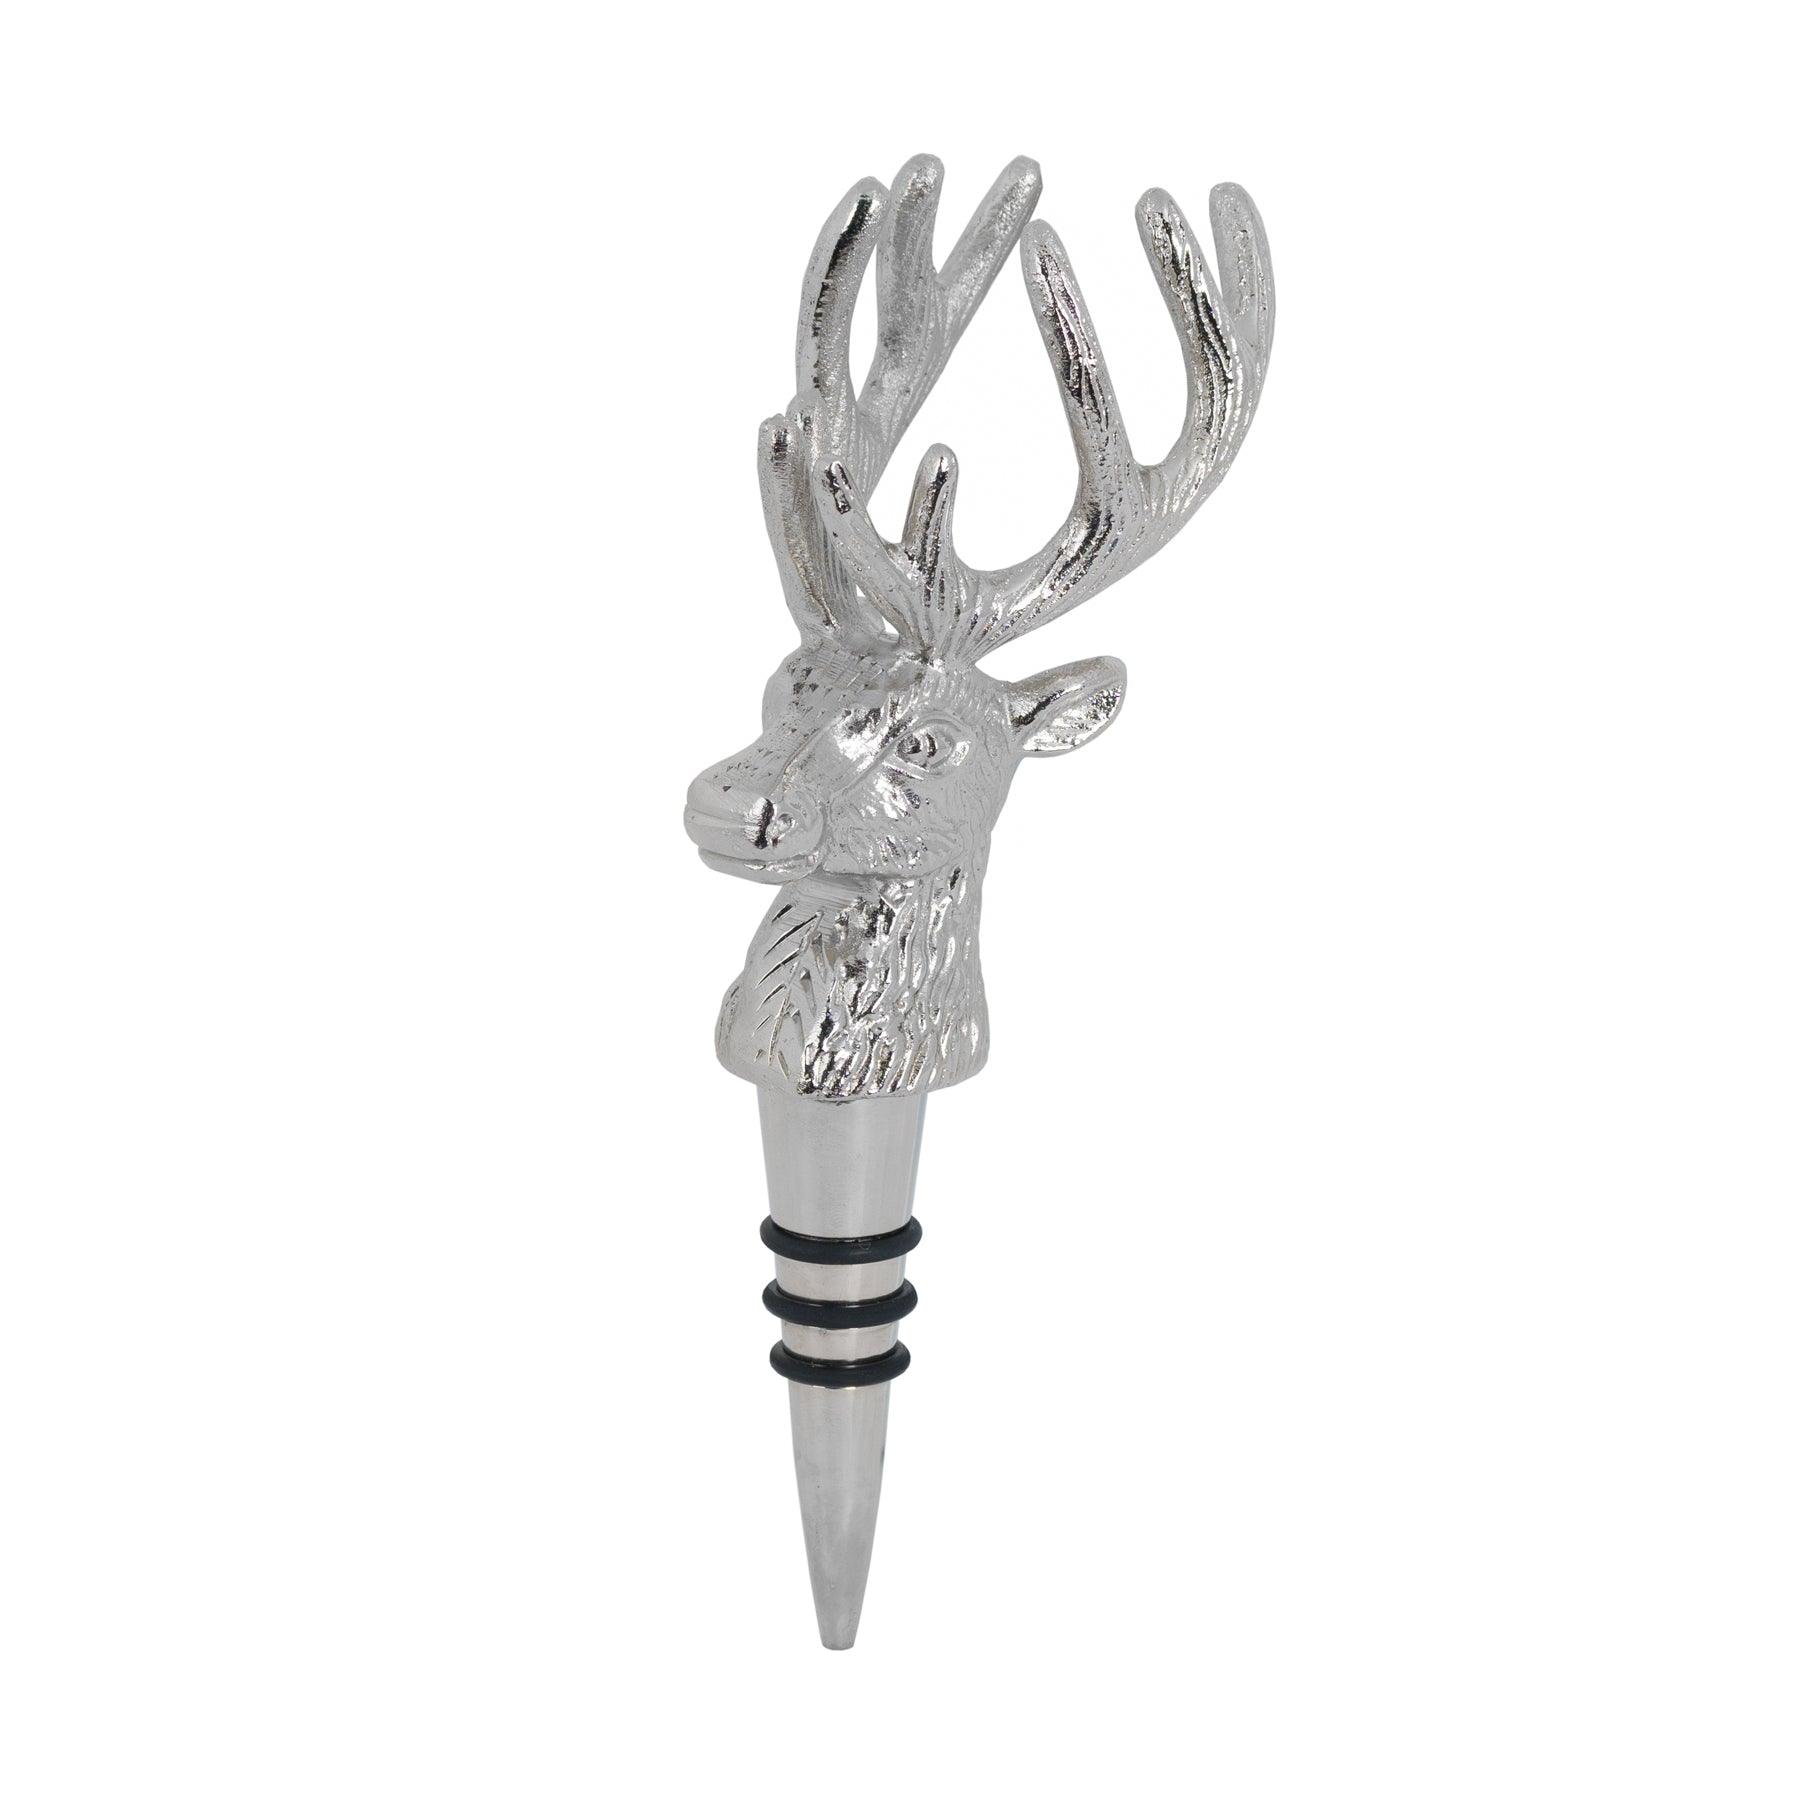 View Nickel Stag Head Bottle Stopper information